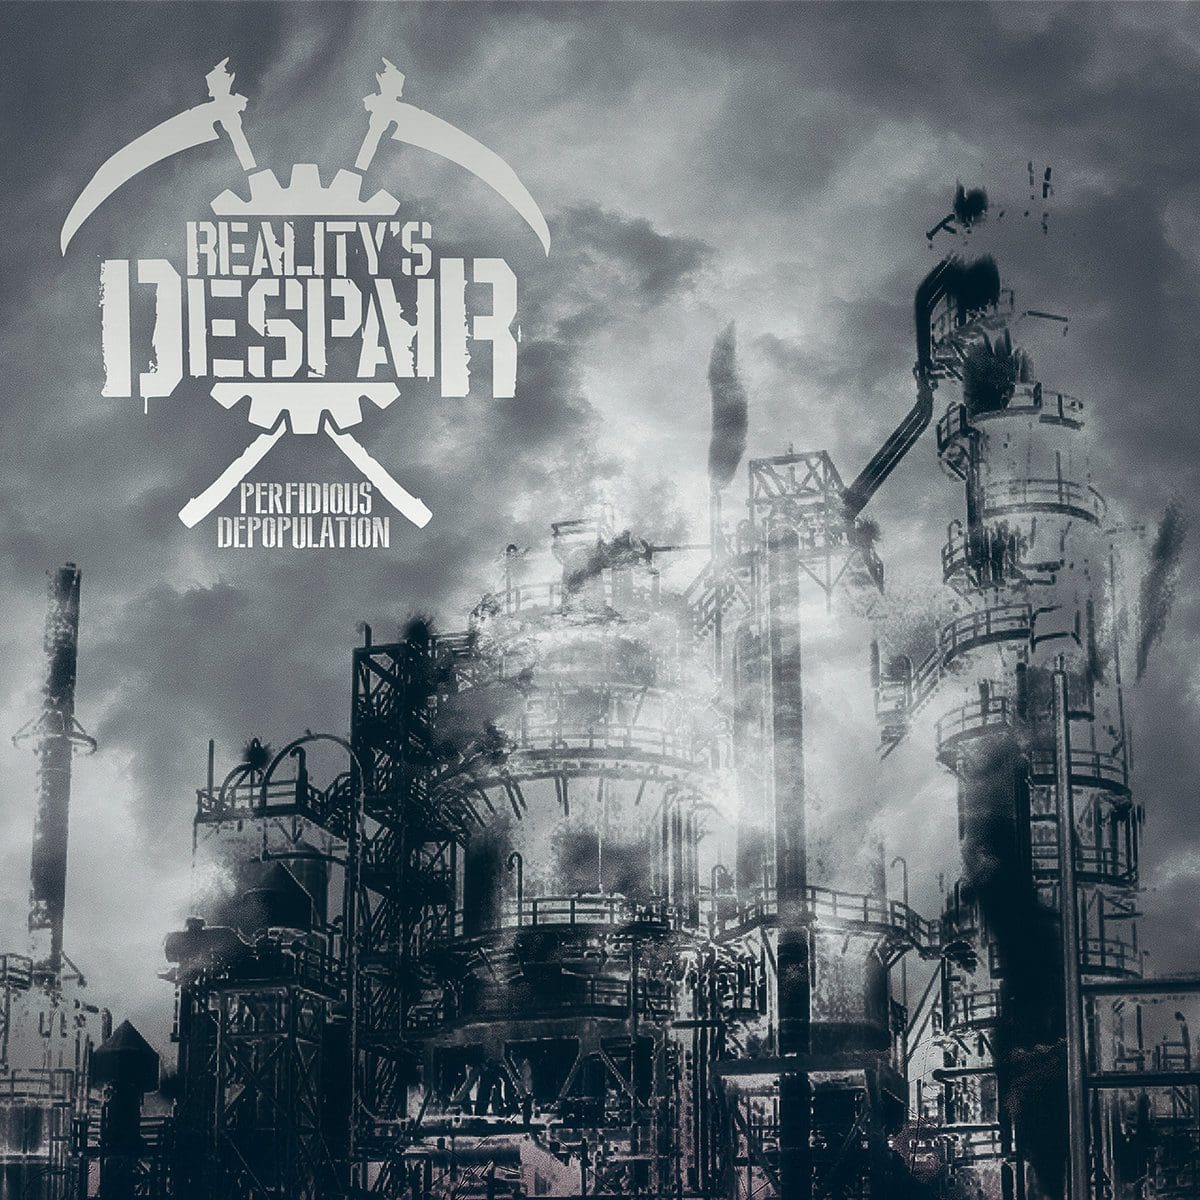 Belgian dark electro act Reality's Despair joins Insane Records and releases 'Perfidious Depopulation' album